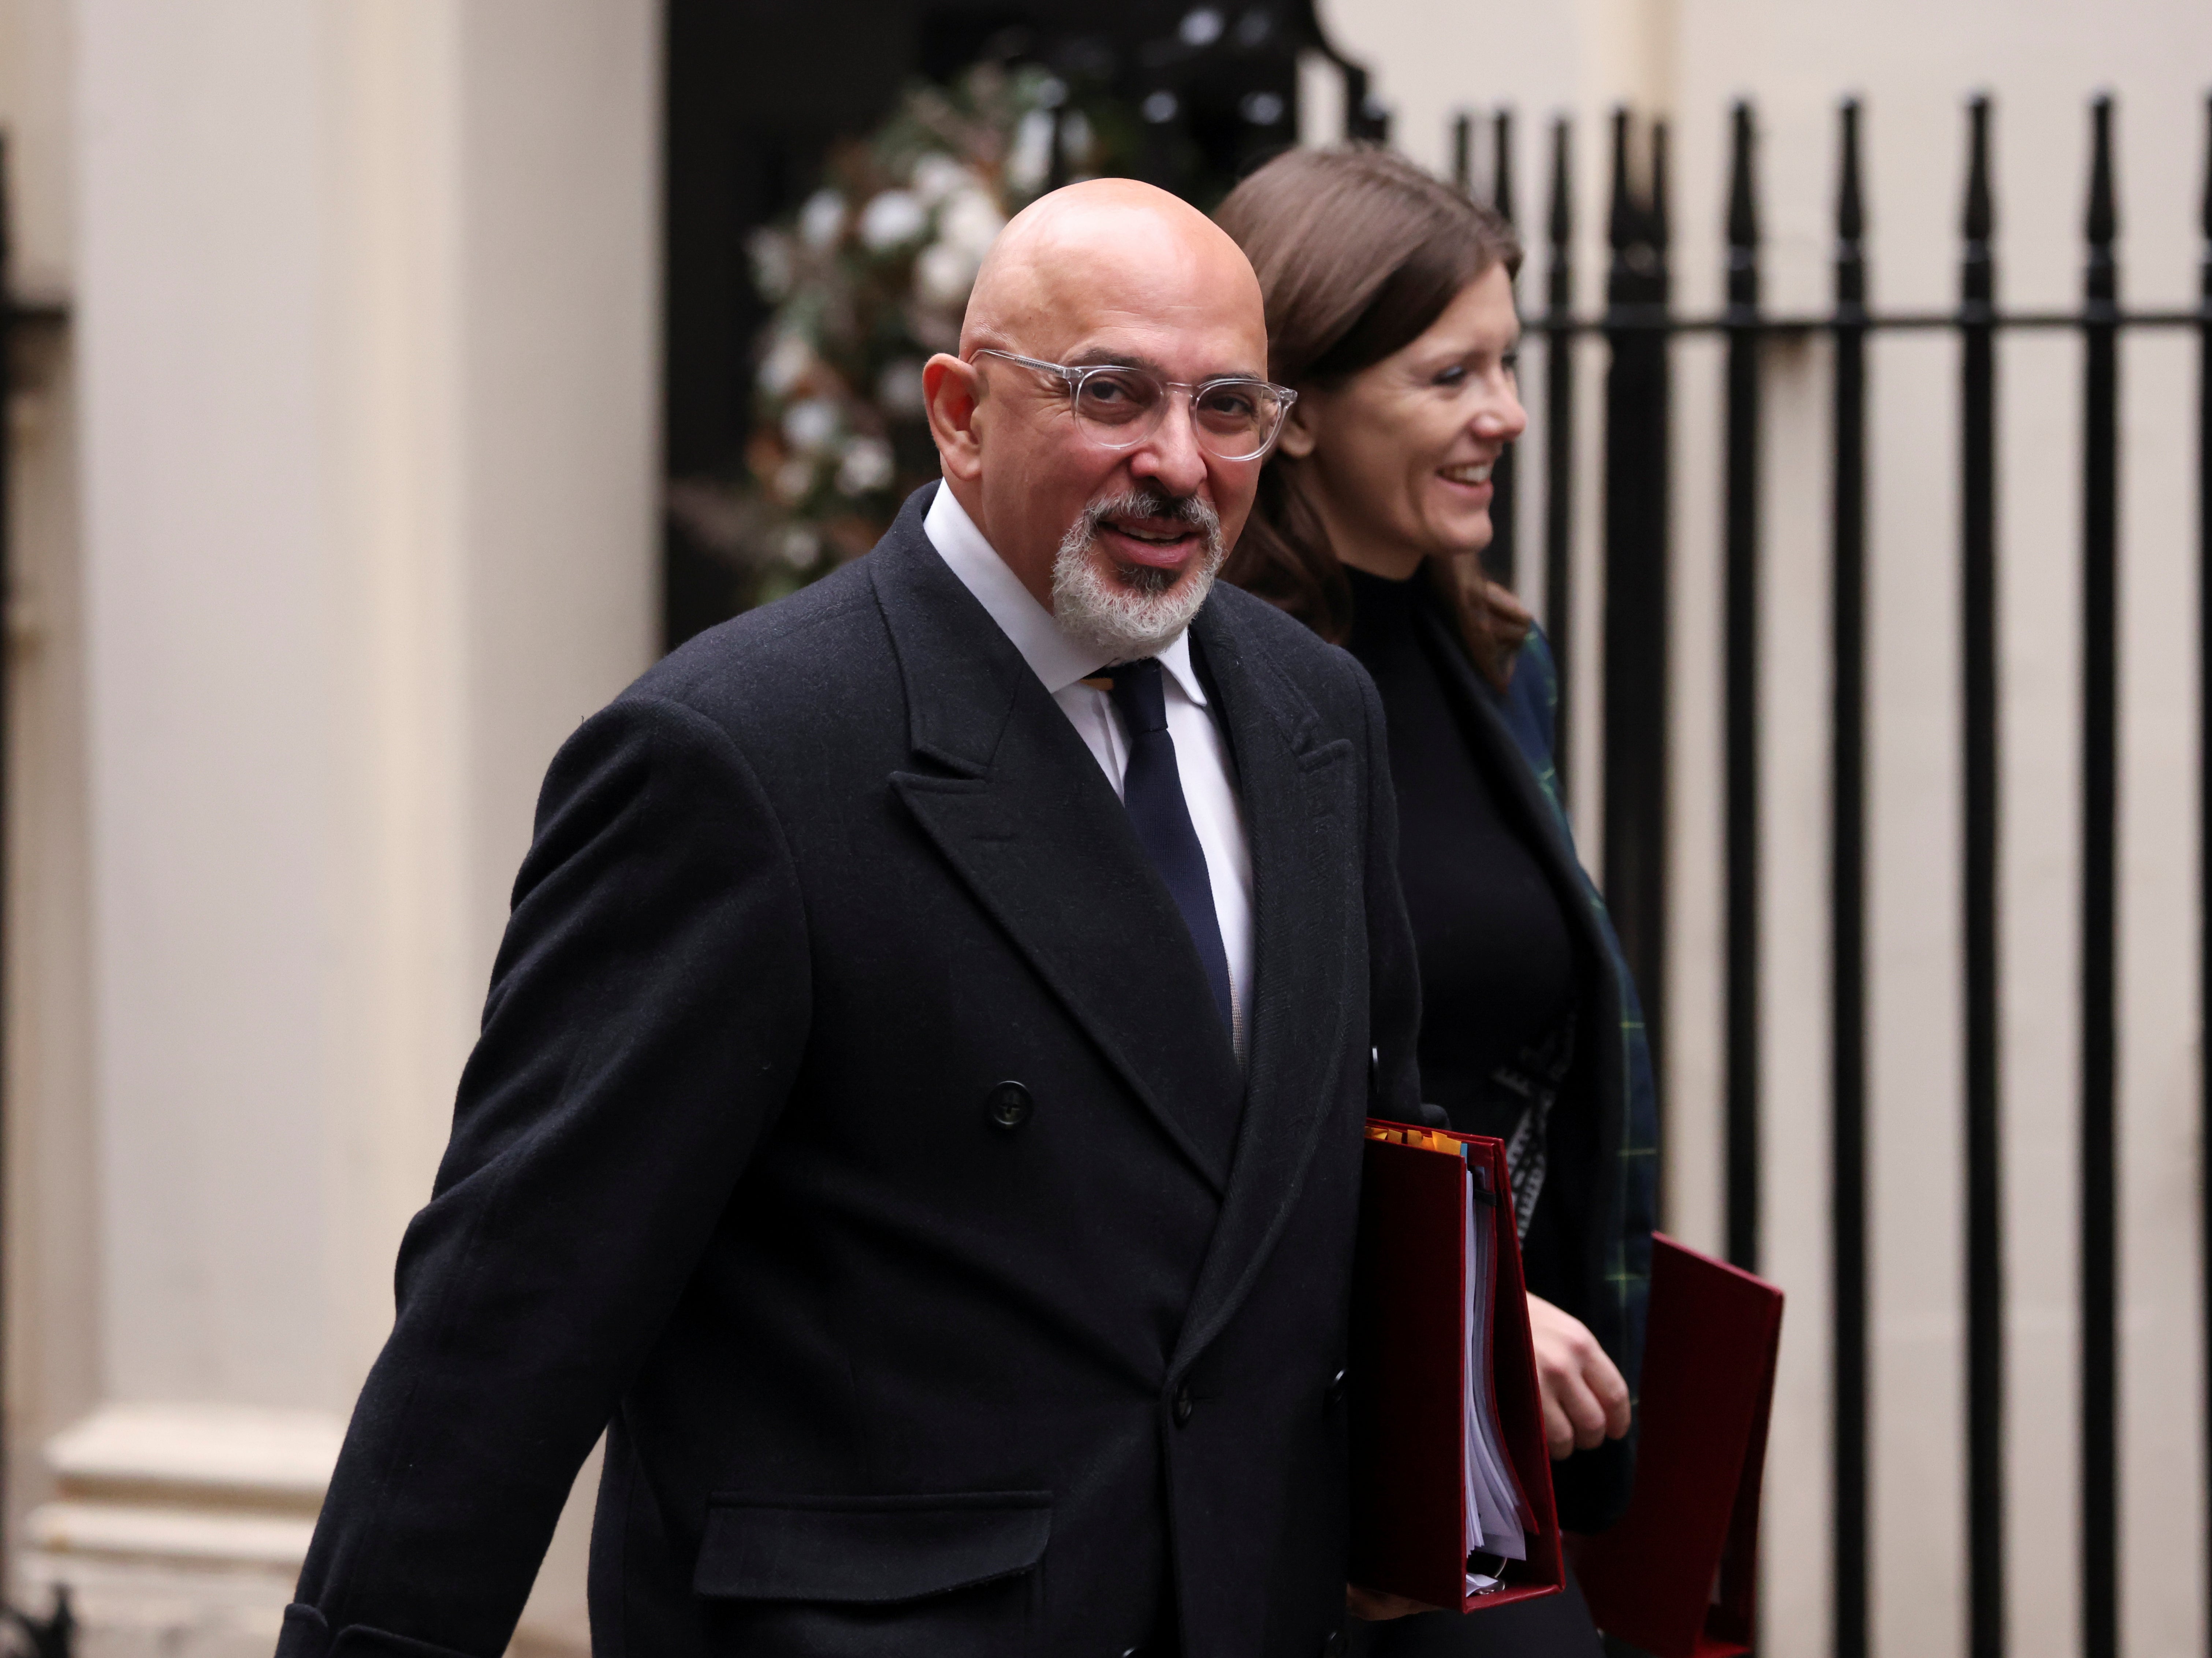 Nadhim Zahawi says the government will help former teachers to register for supply agencies